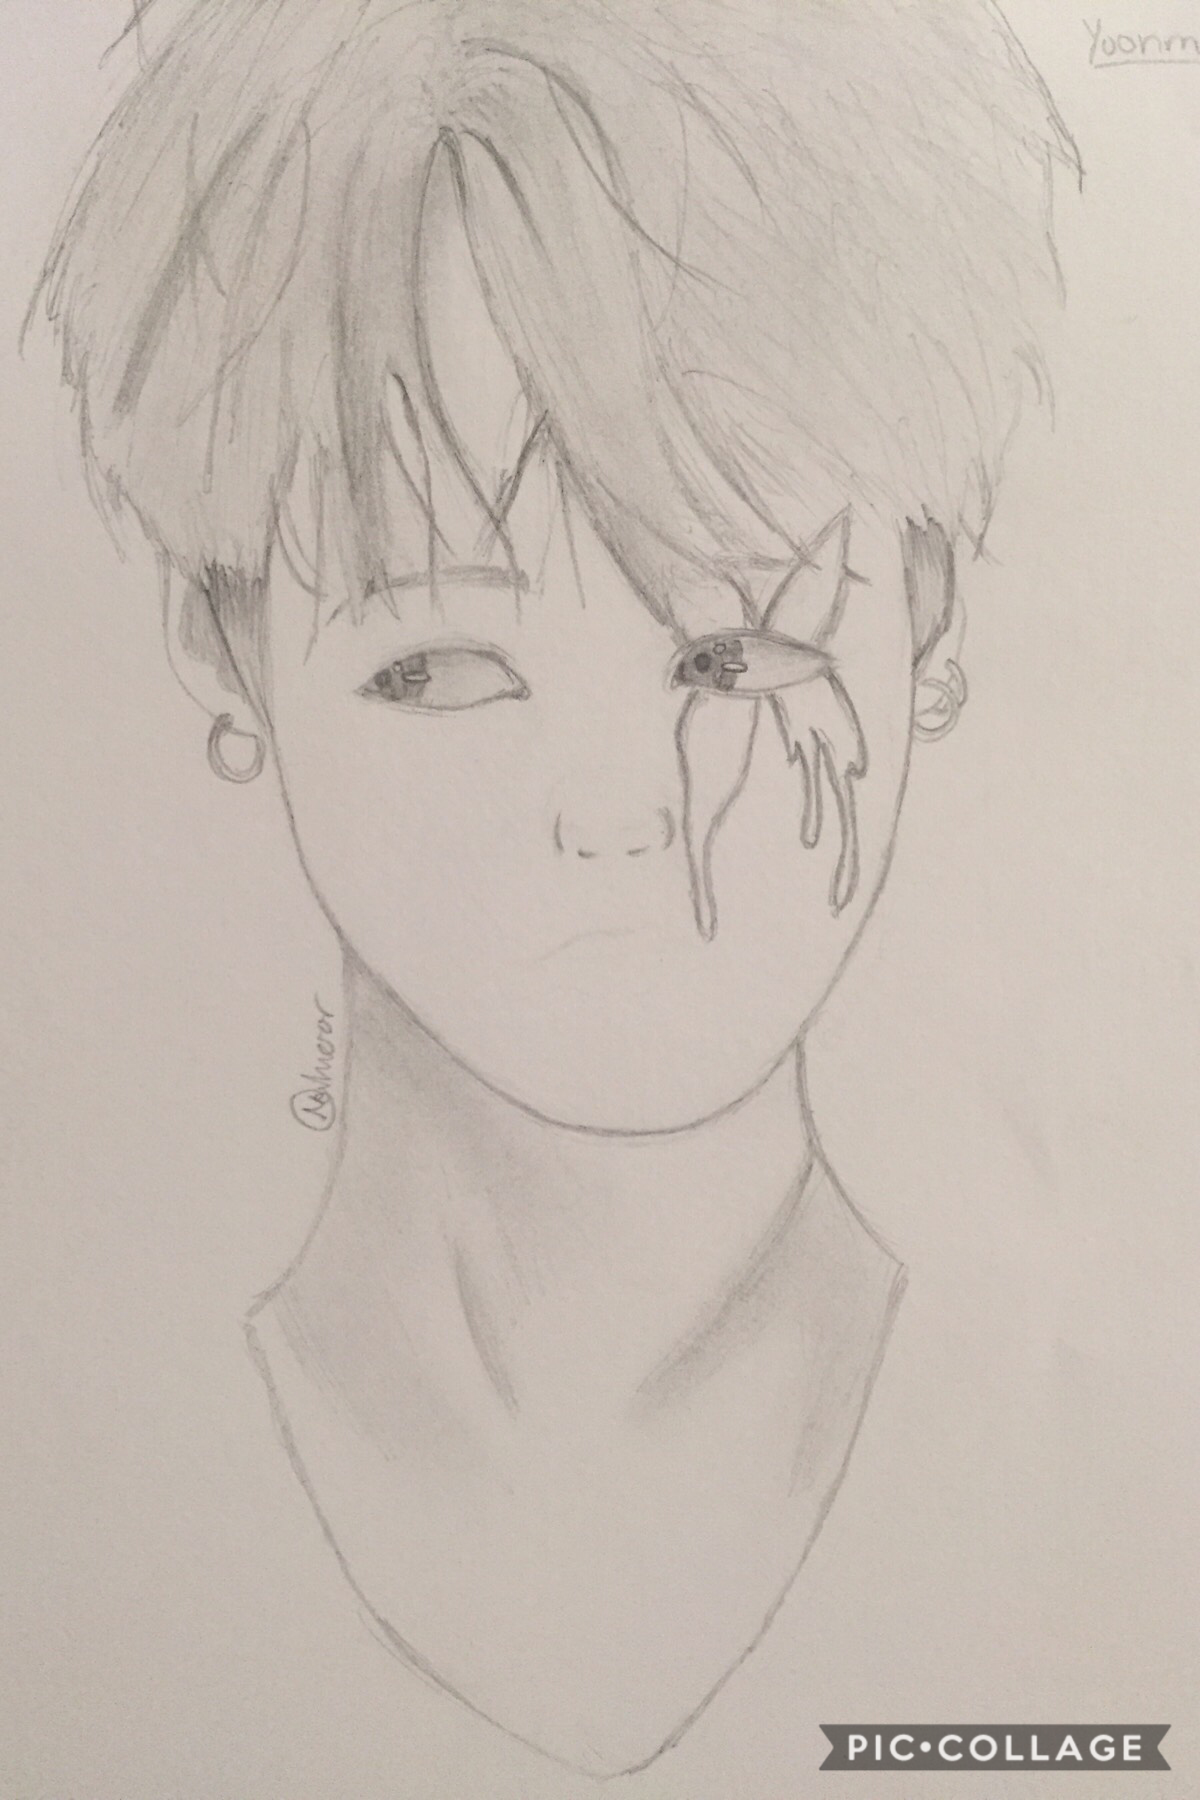 I don’t know what I did, I messed up pretty badly. I was drawing some type of Yoongi fanart but the iPad died before I can draw the face, so I had to draw it by memory. My sister says he looks like Jimin (in the drawing). Yah, I think I messed up pretty b